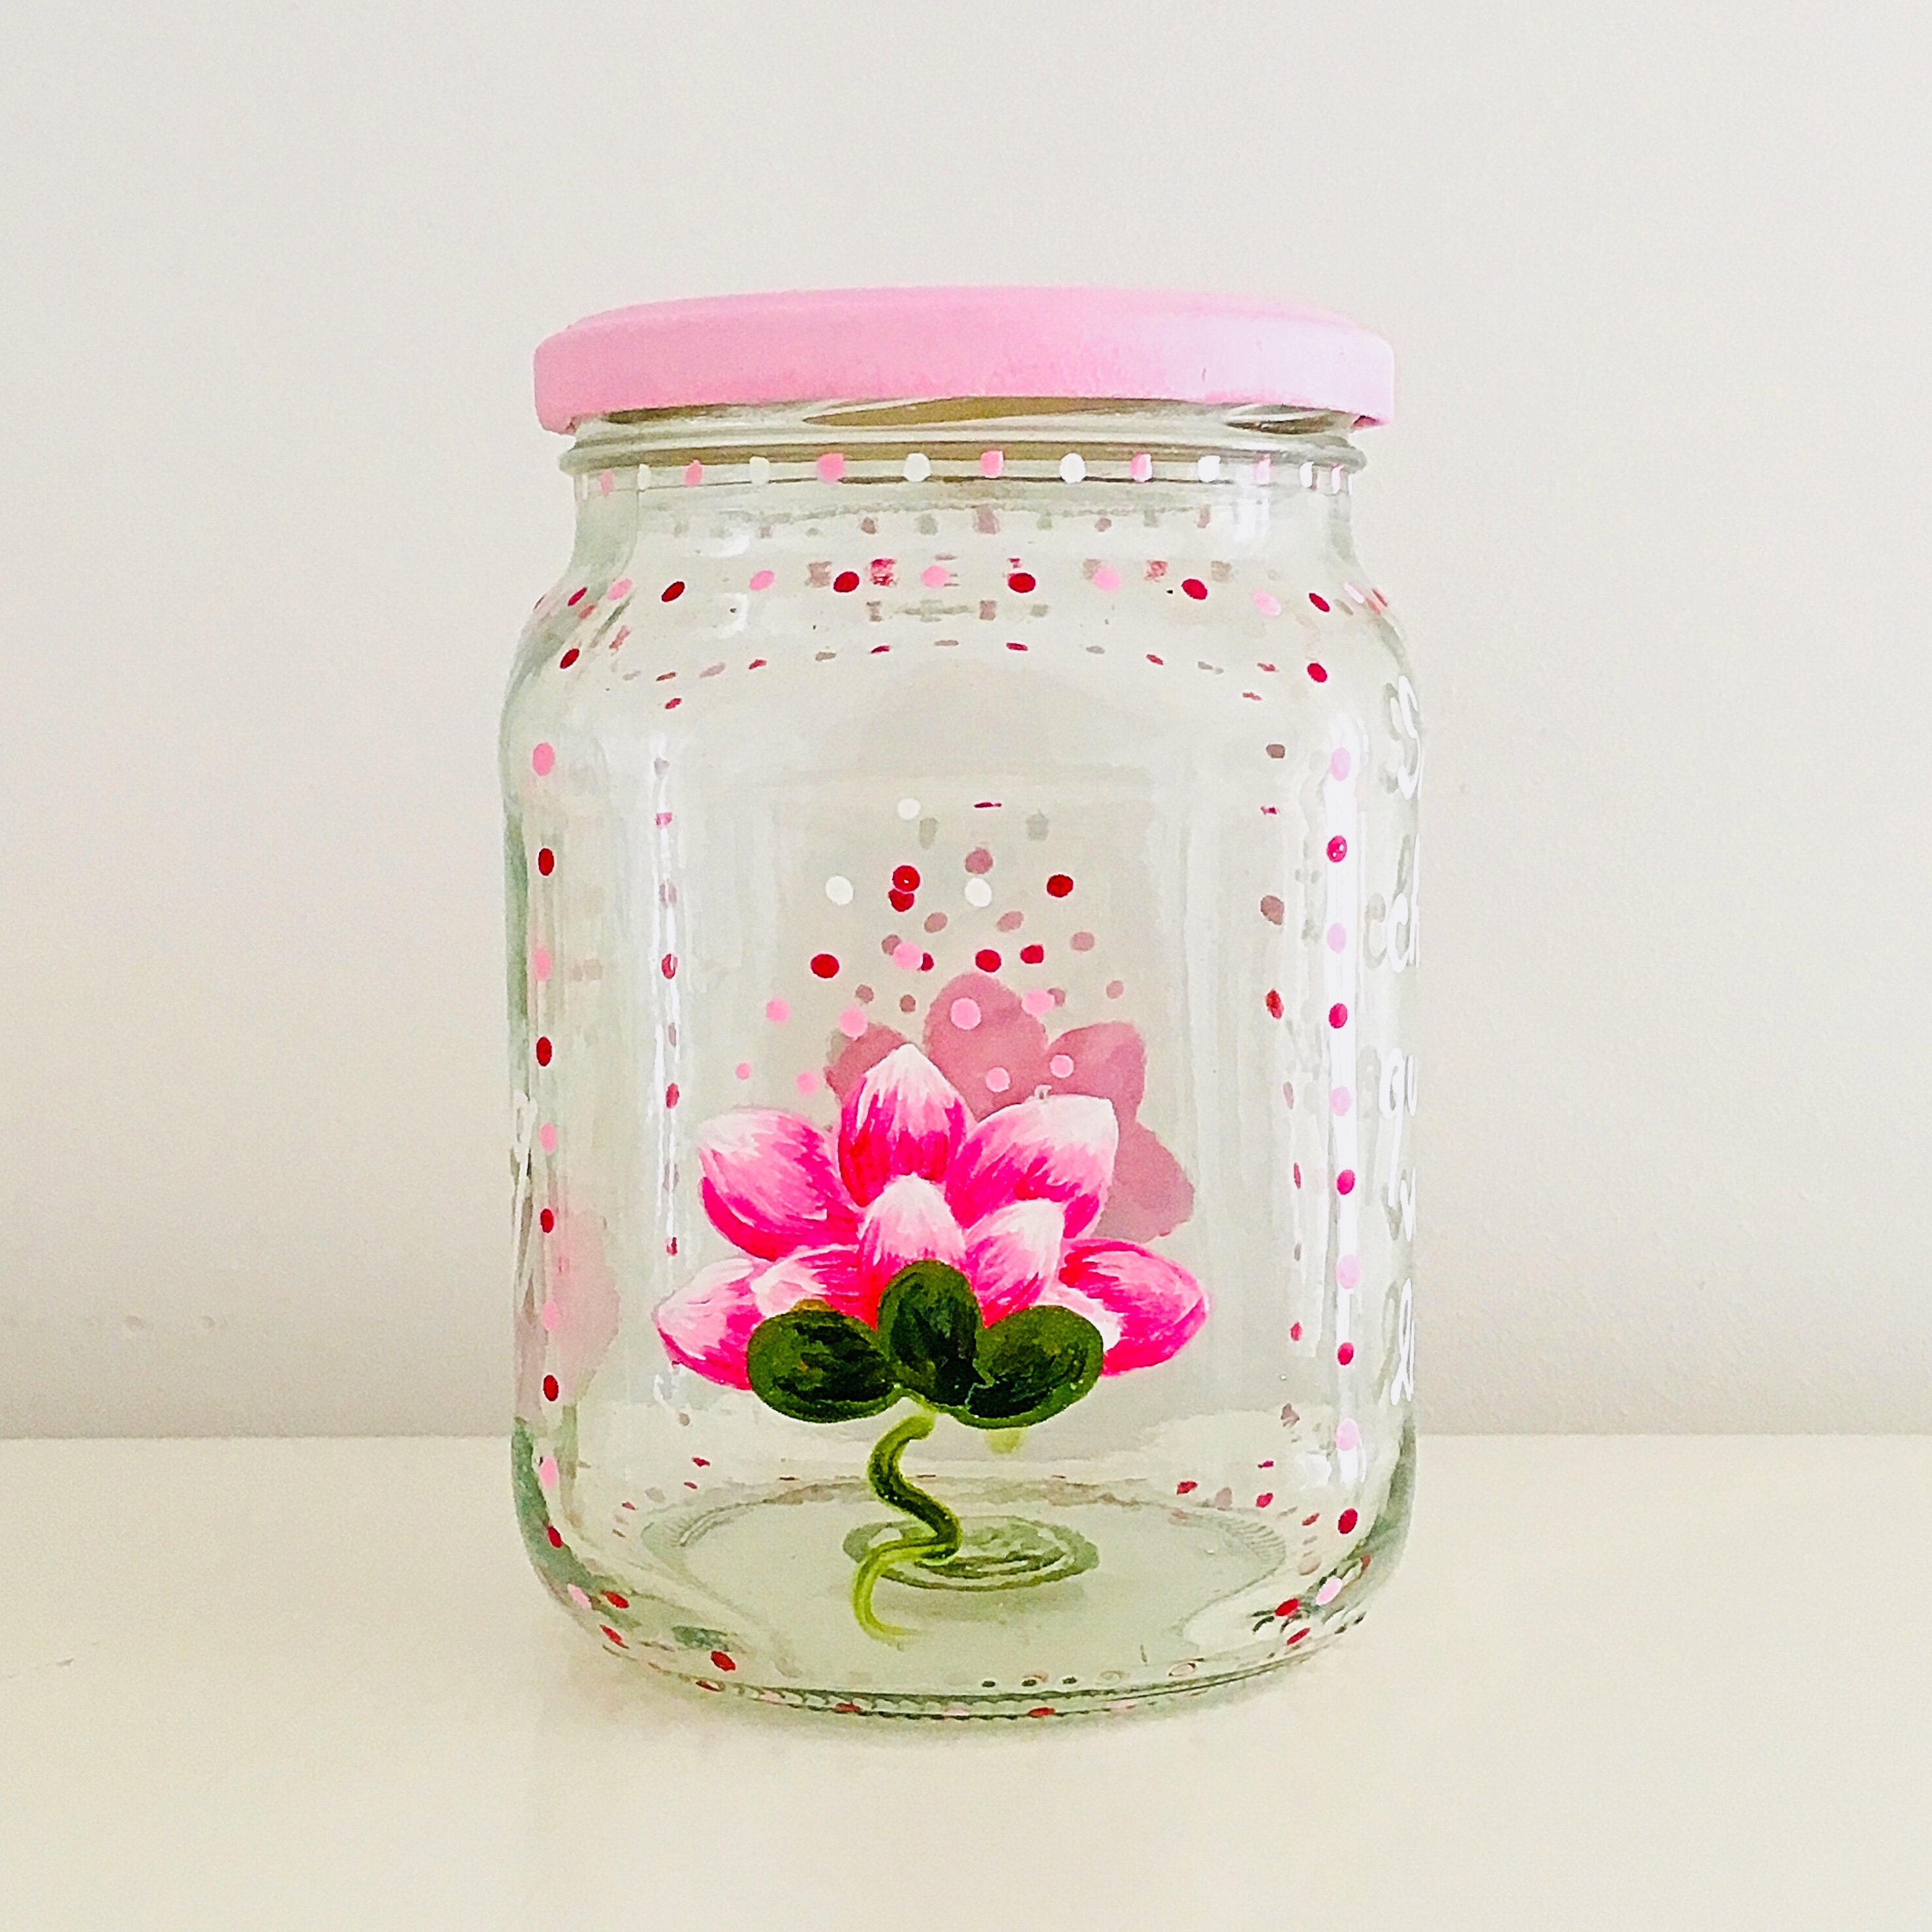 Good Morning Line Unique Upcycled Hand Painted Glass Container Lotus Flower  Decor / NAMASTE / Eco Friendly Product / SOLD EMPTY 